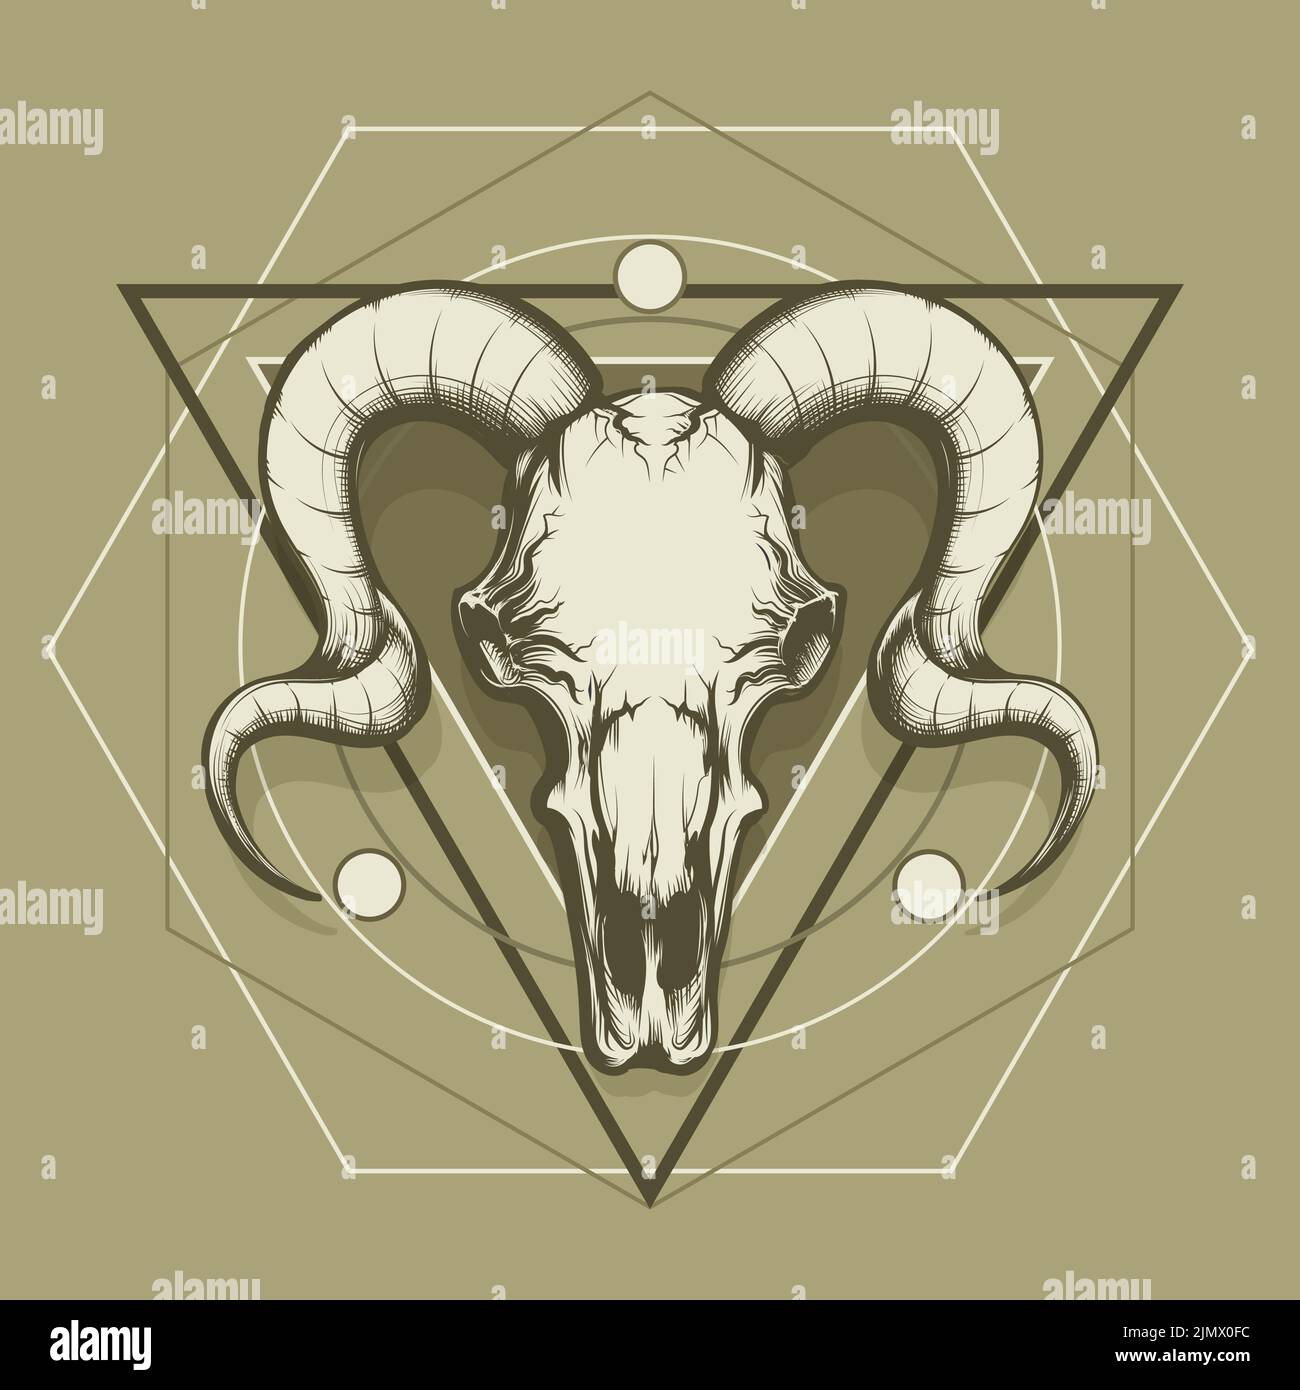 Esoteric Illustration of Goat skull and Sacred Geometry Elements. Vector Illustration Stock Vector